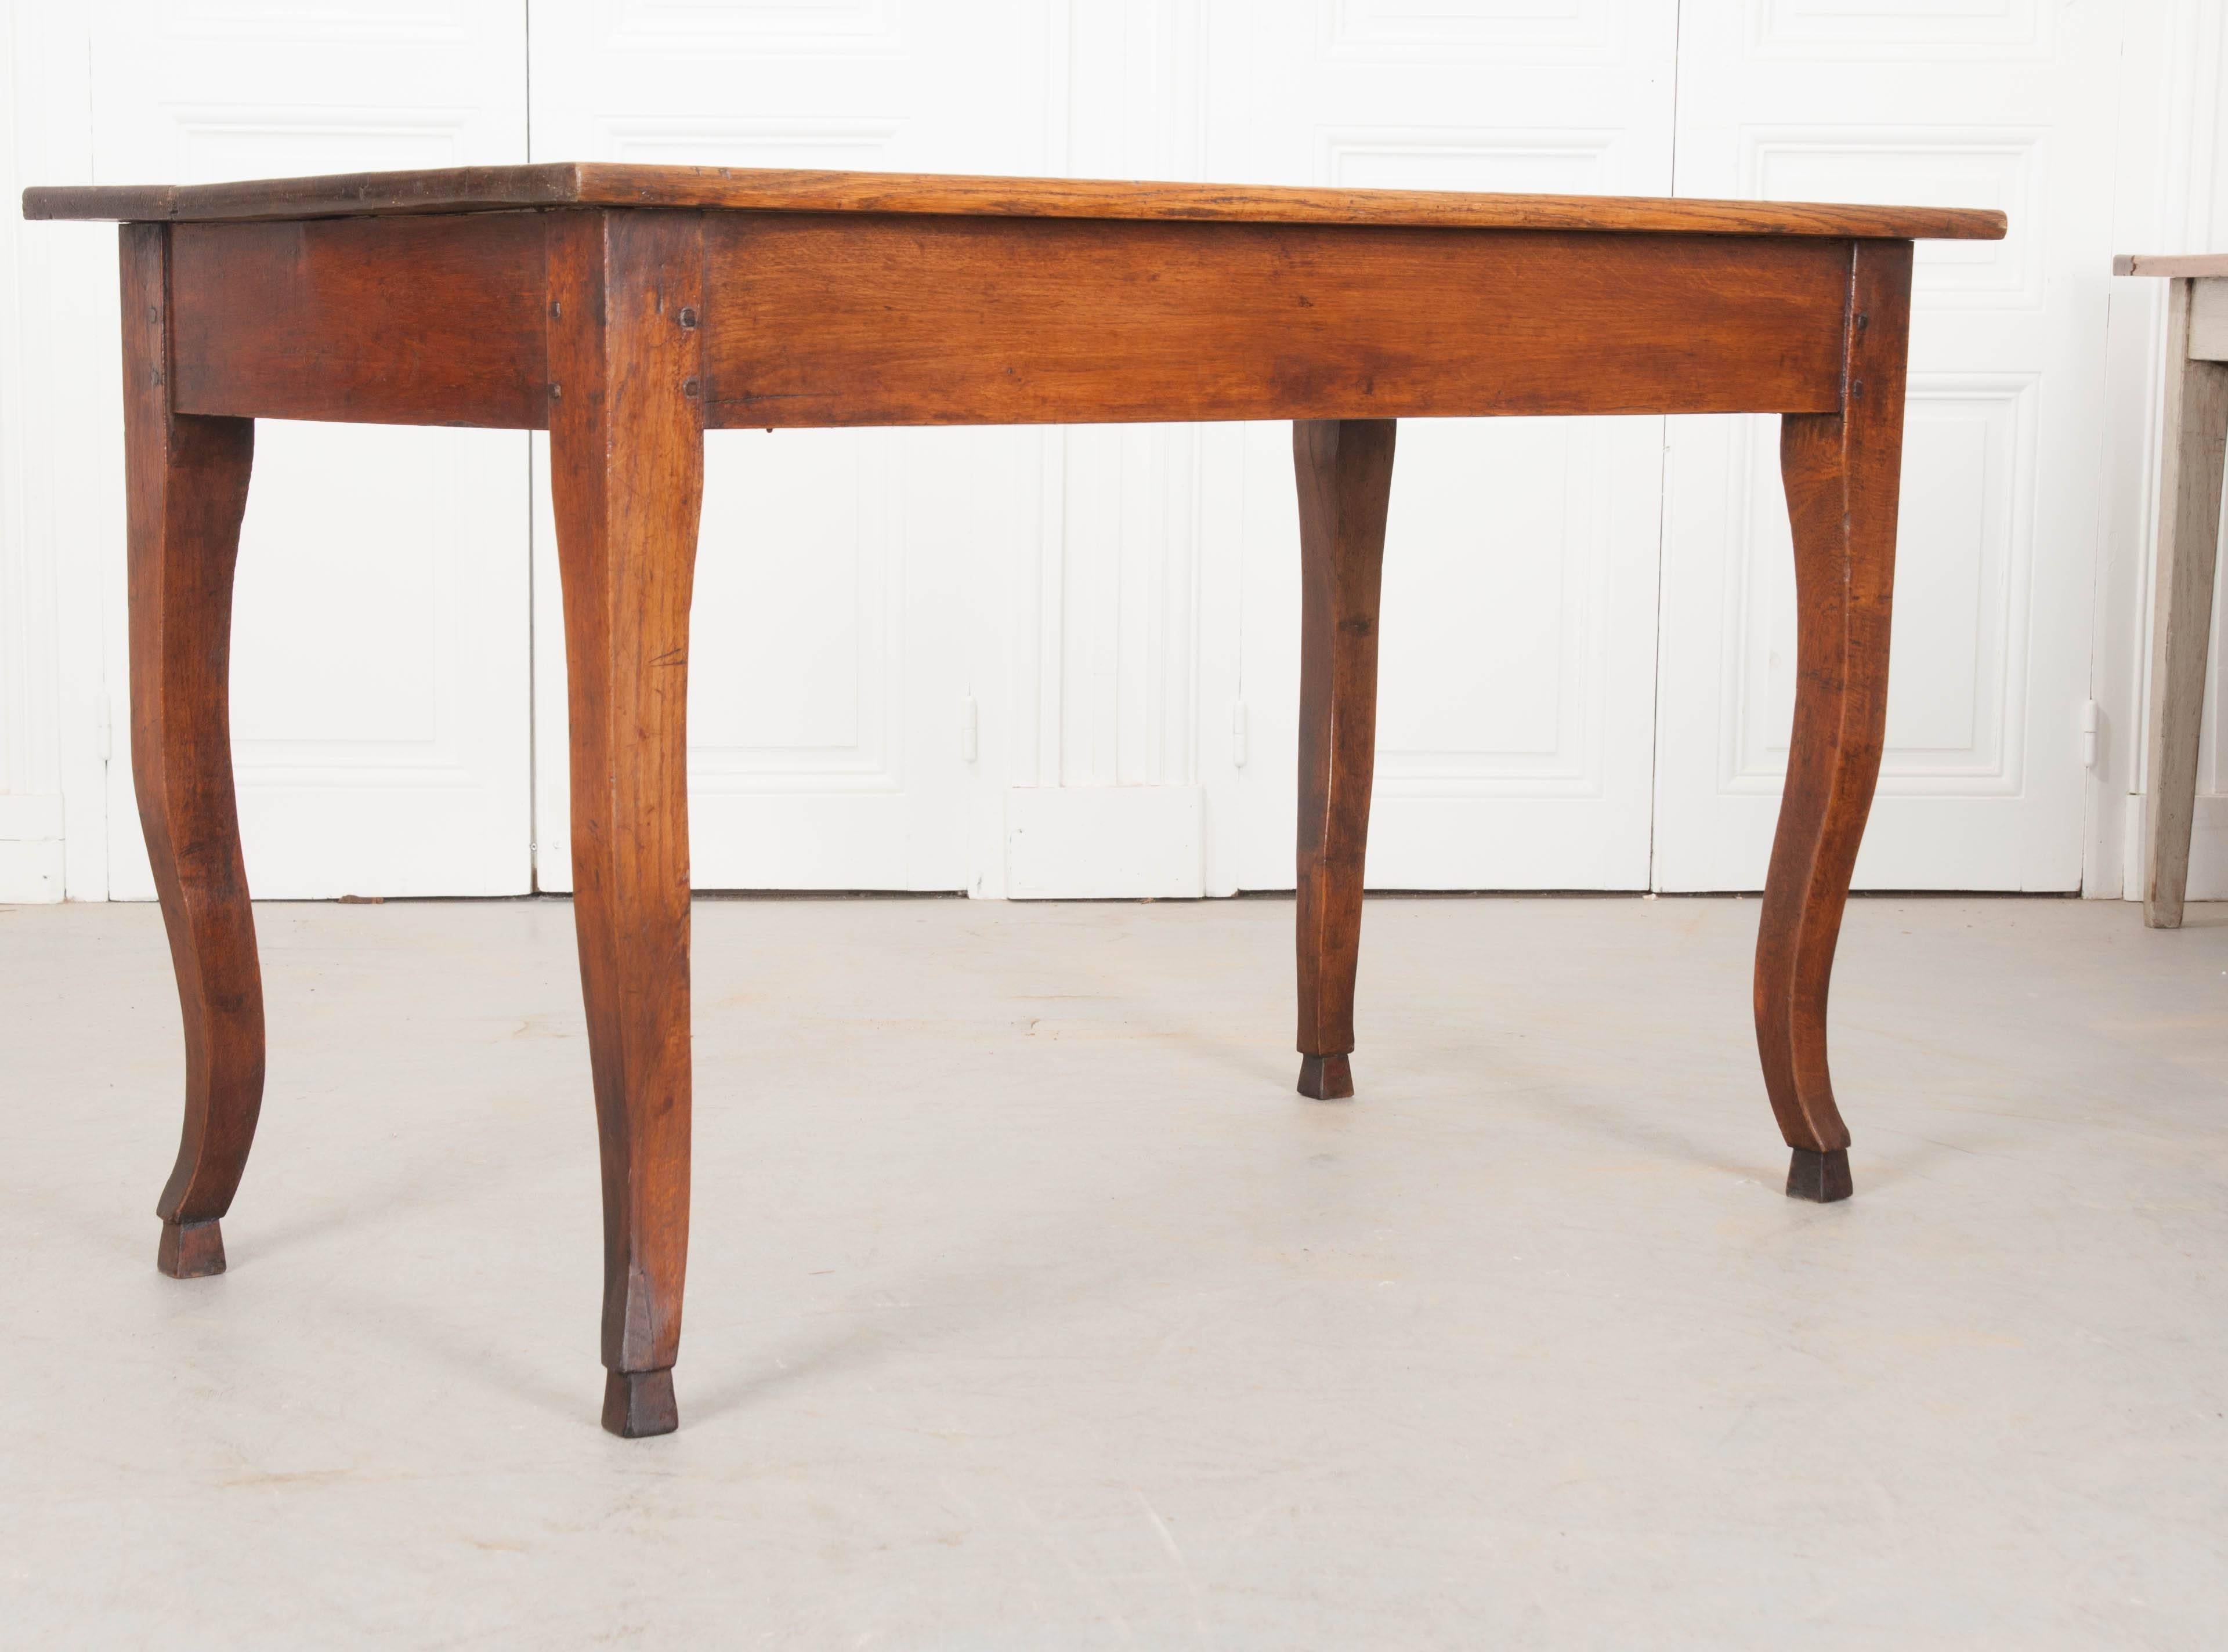 A wonderful oak dining table, with hand-carved cabriole legs, from 19th century, France. This smaller dining table would be best suited for a breakfast room, kitchen, or small dining space. Ideal for someone with limited space, the table is charming